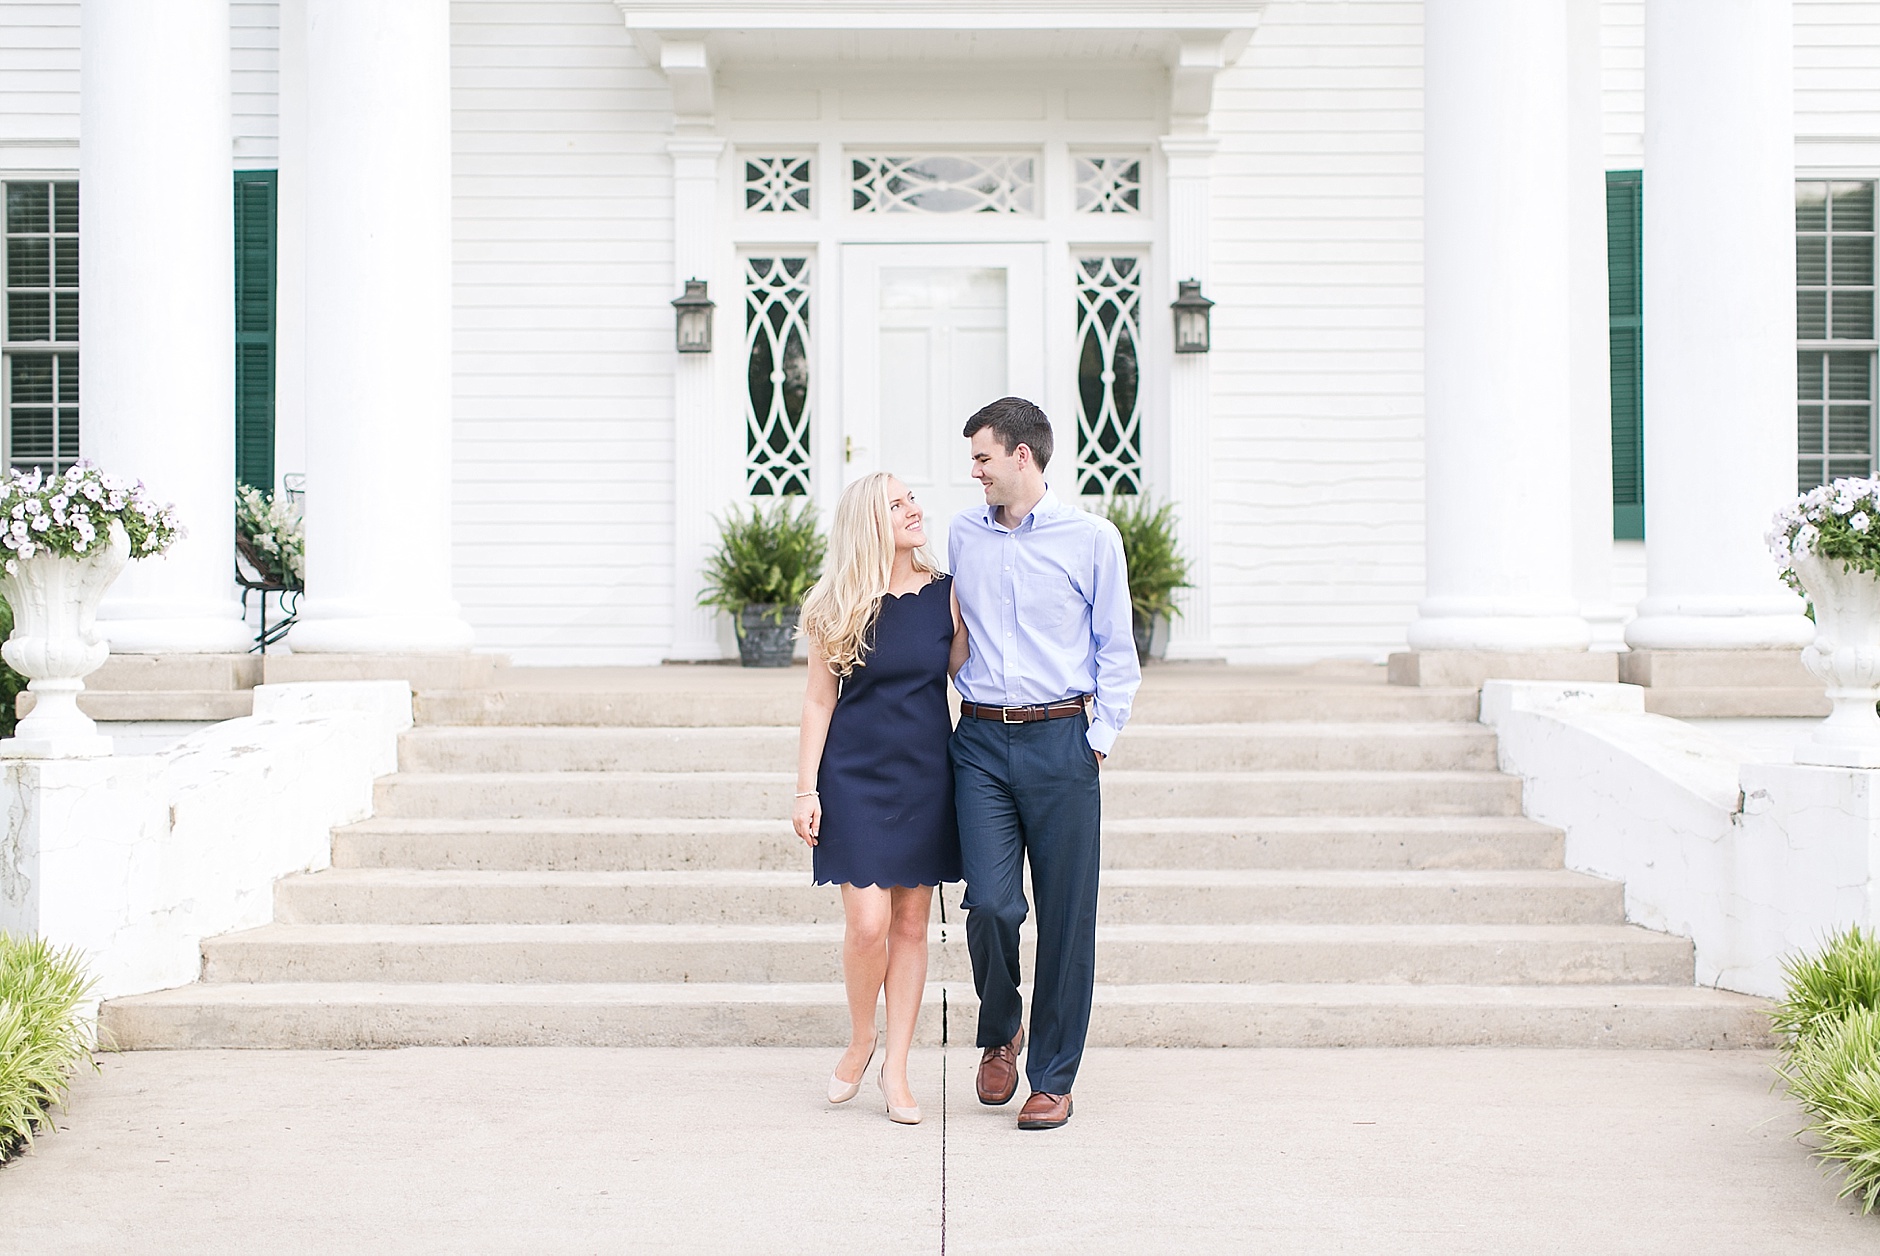 A spring Historic Family Home engagement session by Rachael Houser Photography